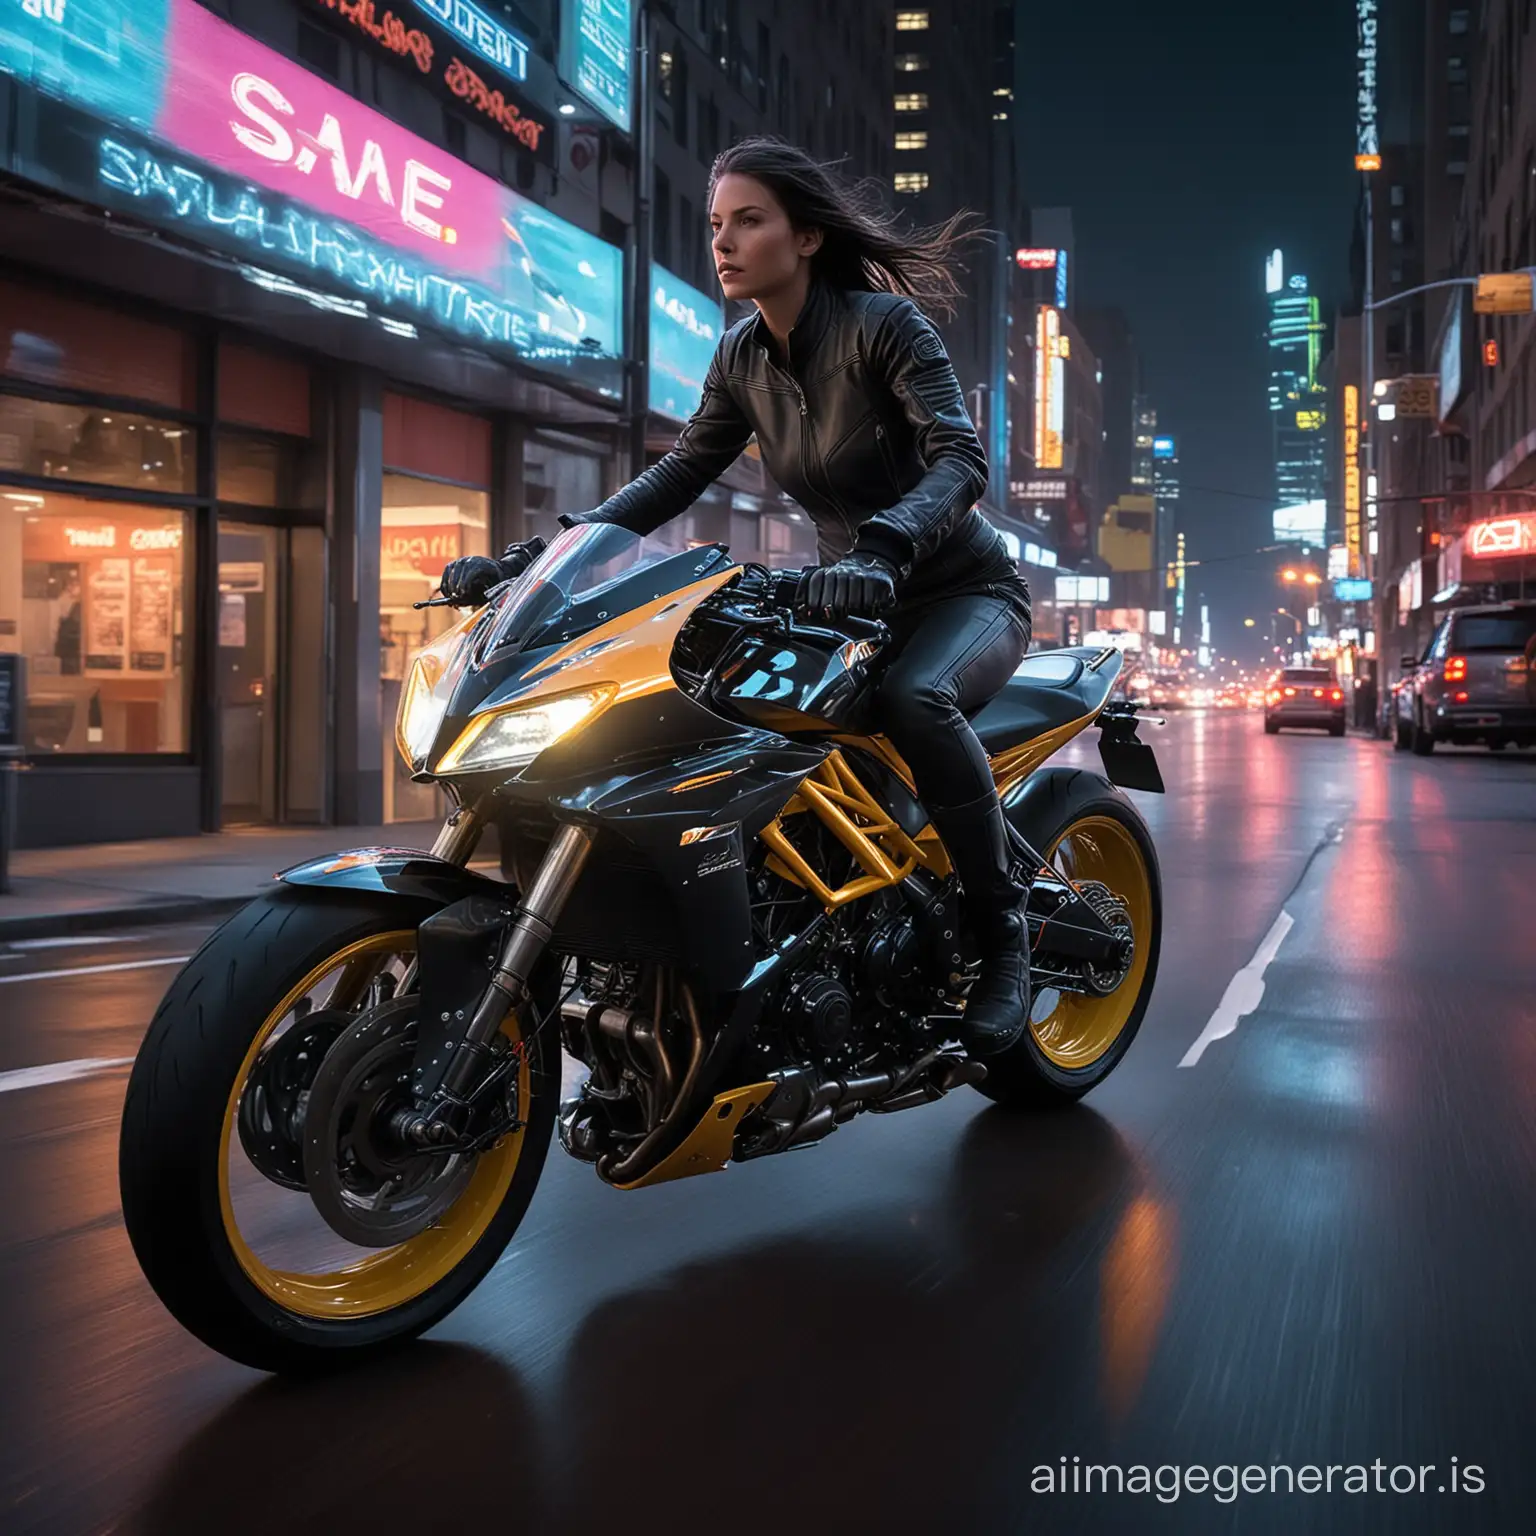 Electrifying scene captures a stunning woman astride a futuristic race motorcycle, its sleek frame bathed in neon reflections from state-of-the-art LED displays and avant-garde controls. As she throttles forward, slicing through the neon-lit city, the pulsating rhythm of the night amplifies her ethereal radiance. Leaving a phosphorescent trail in her wake, her rapidity seems almost unreal. BREAK Hot on her trail are street racing cars, their engines roaring and headlights blazing. They swerve, drift, and make death-defying jumps, pulling off audacious stunts in a relentless pursuit to outmaneuver and overtake her. Every twist and turn they make echoes the high-octane adrenaline of a "The Fast and the Furious" chase sequence.